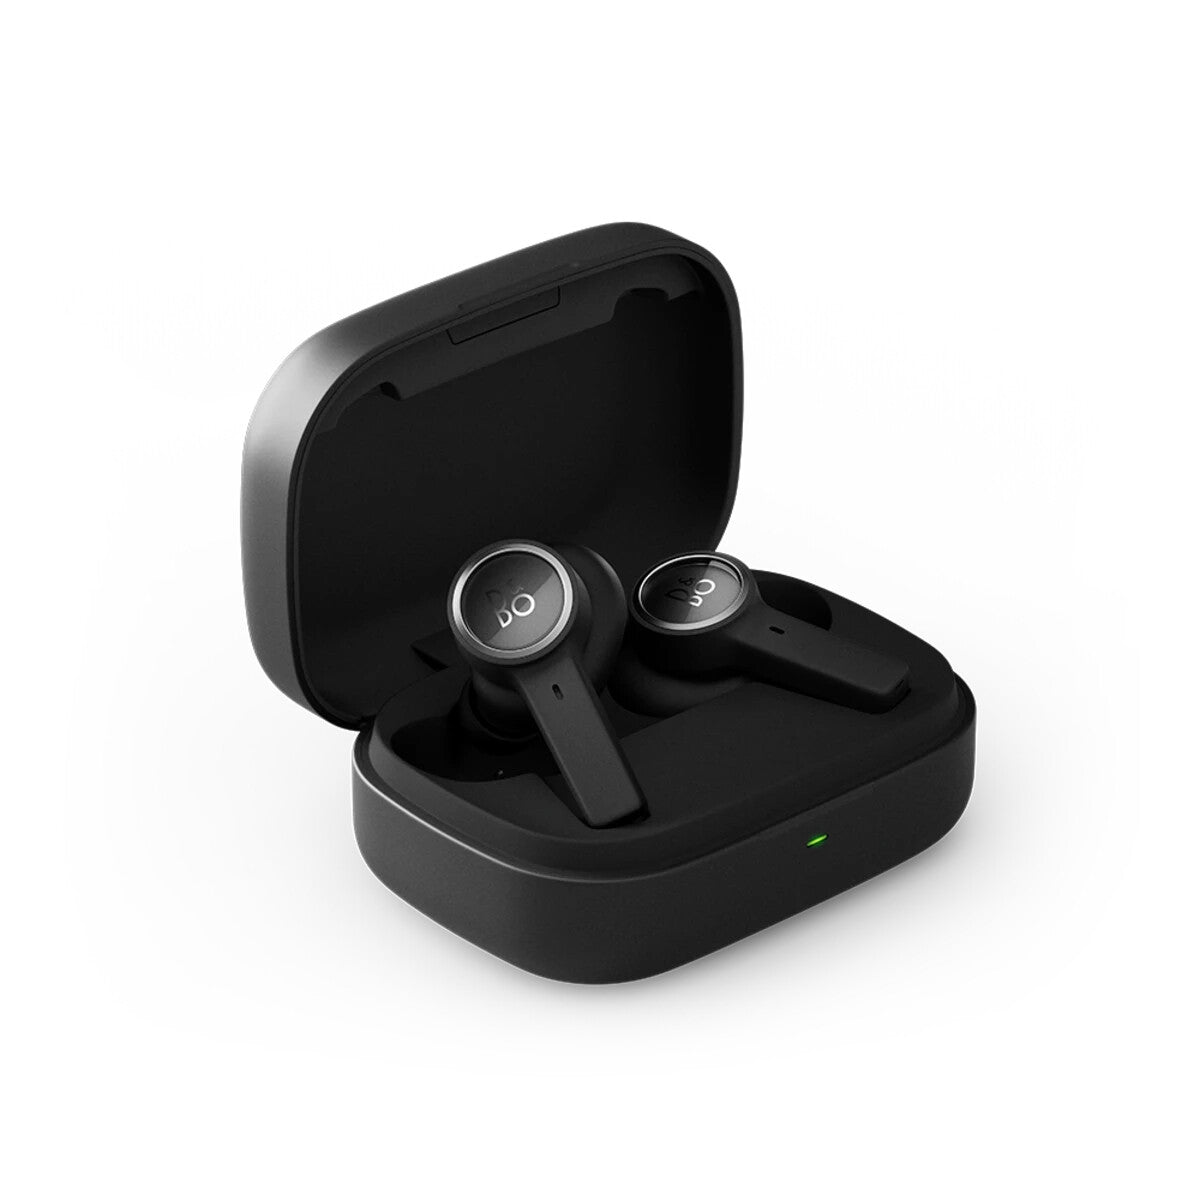 Bang &amp; Olufsen BeoPlay EX - True Wireless Stereo (TWS) In-ear Bluetooth Earbuds in Black